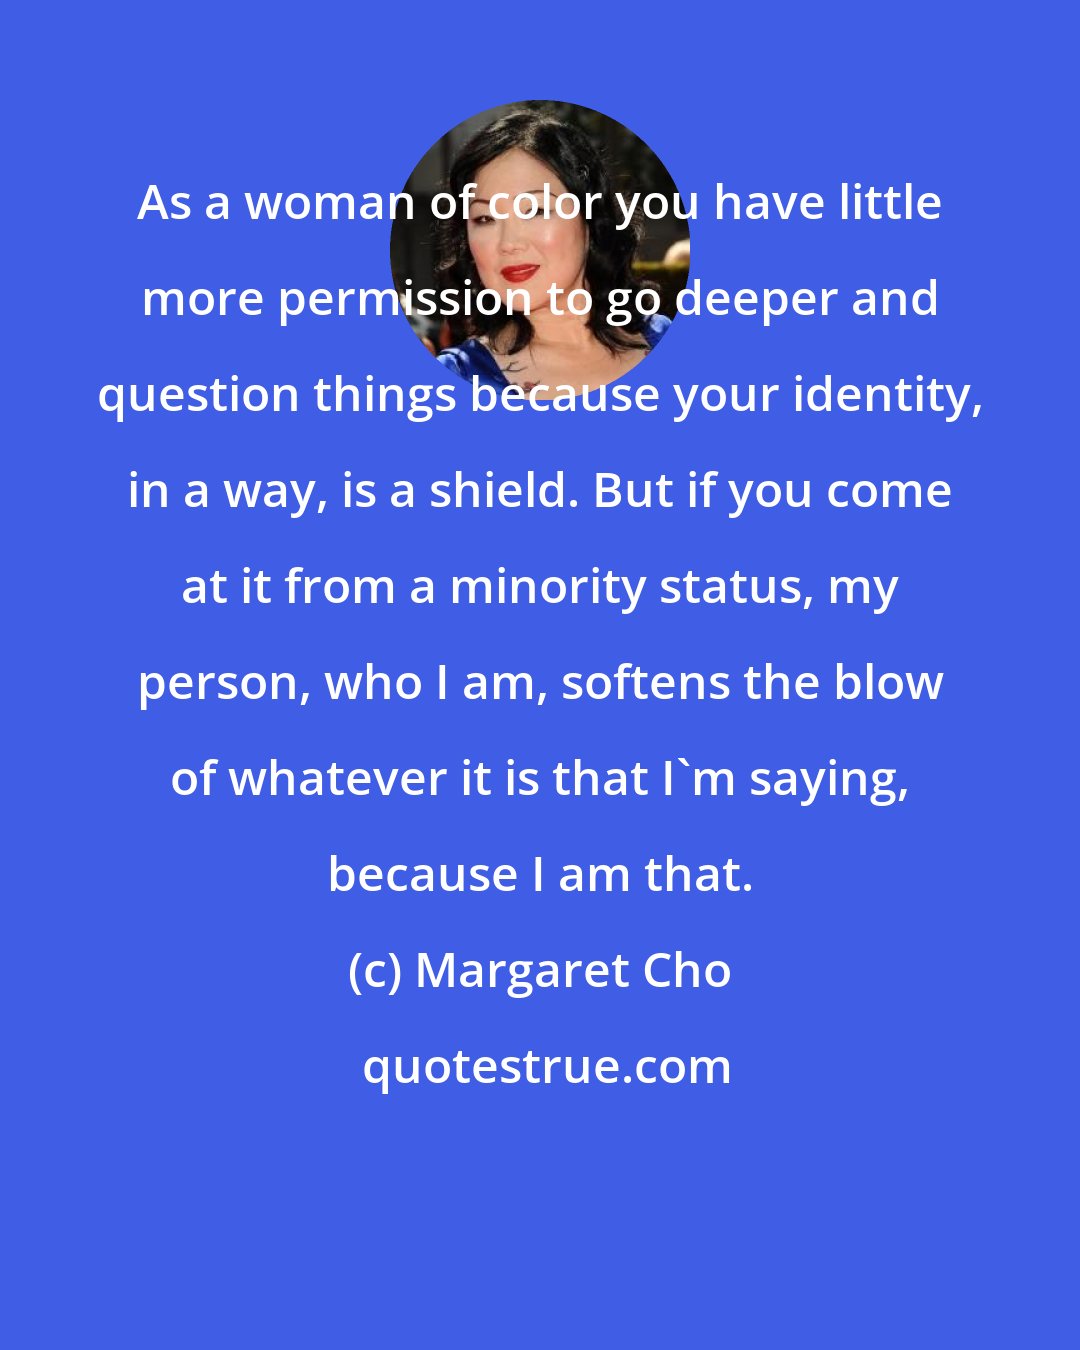 Margaret Cho: As a woman of color you have little more permission to go deeper and question things because your identity, in a way, is a shield. But if you come at it from a minority status, my person, who I am, softens the blow of whatever it is that I'm saying, because I am that.